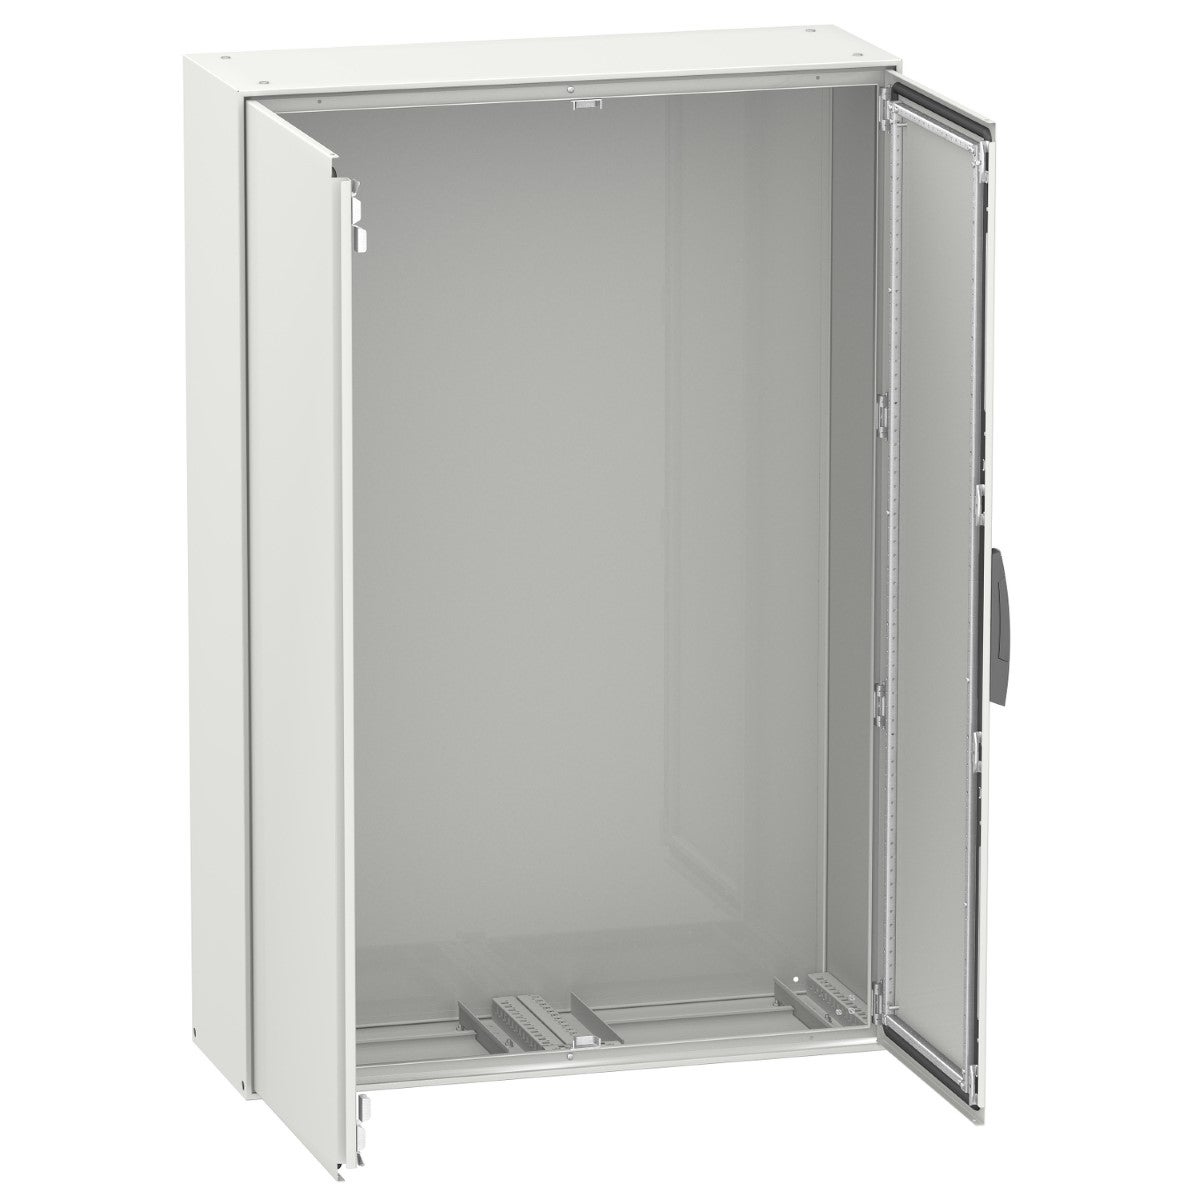 Spacial SM compact enclosure without mounting plate - 1800x1600x500 mm